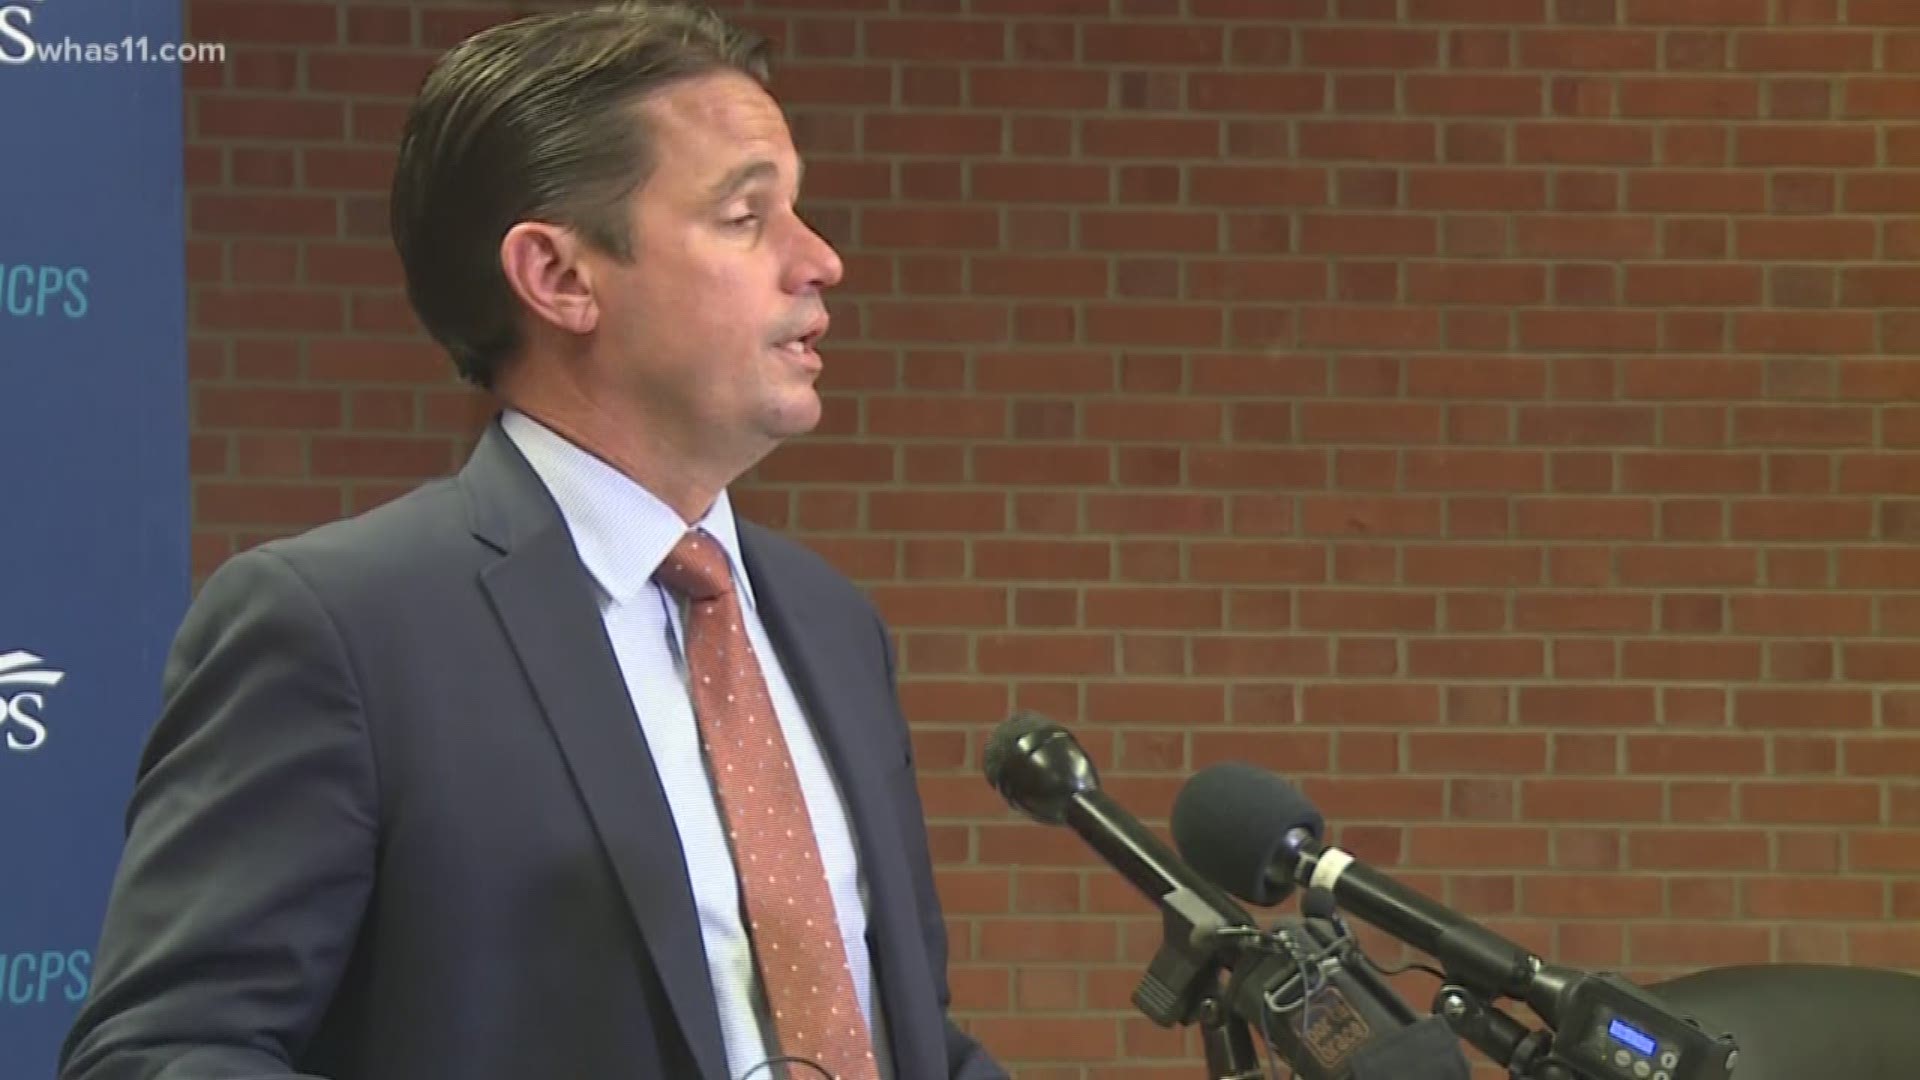 JCPS Superintendent Marty Pollio is now looking for a solution to comply with the law after the board voted down SROs.